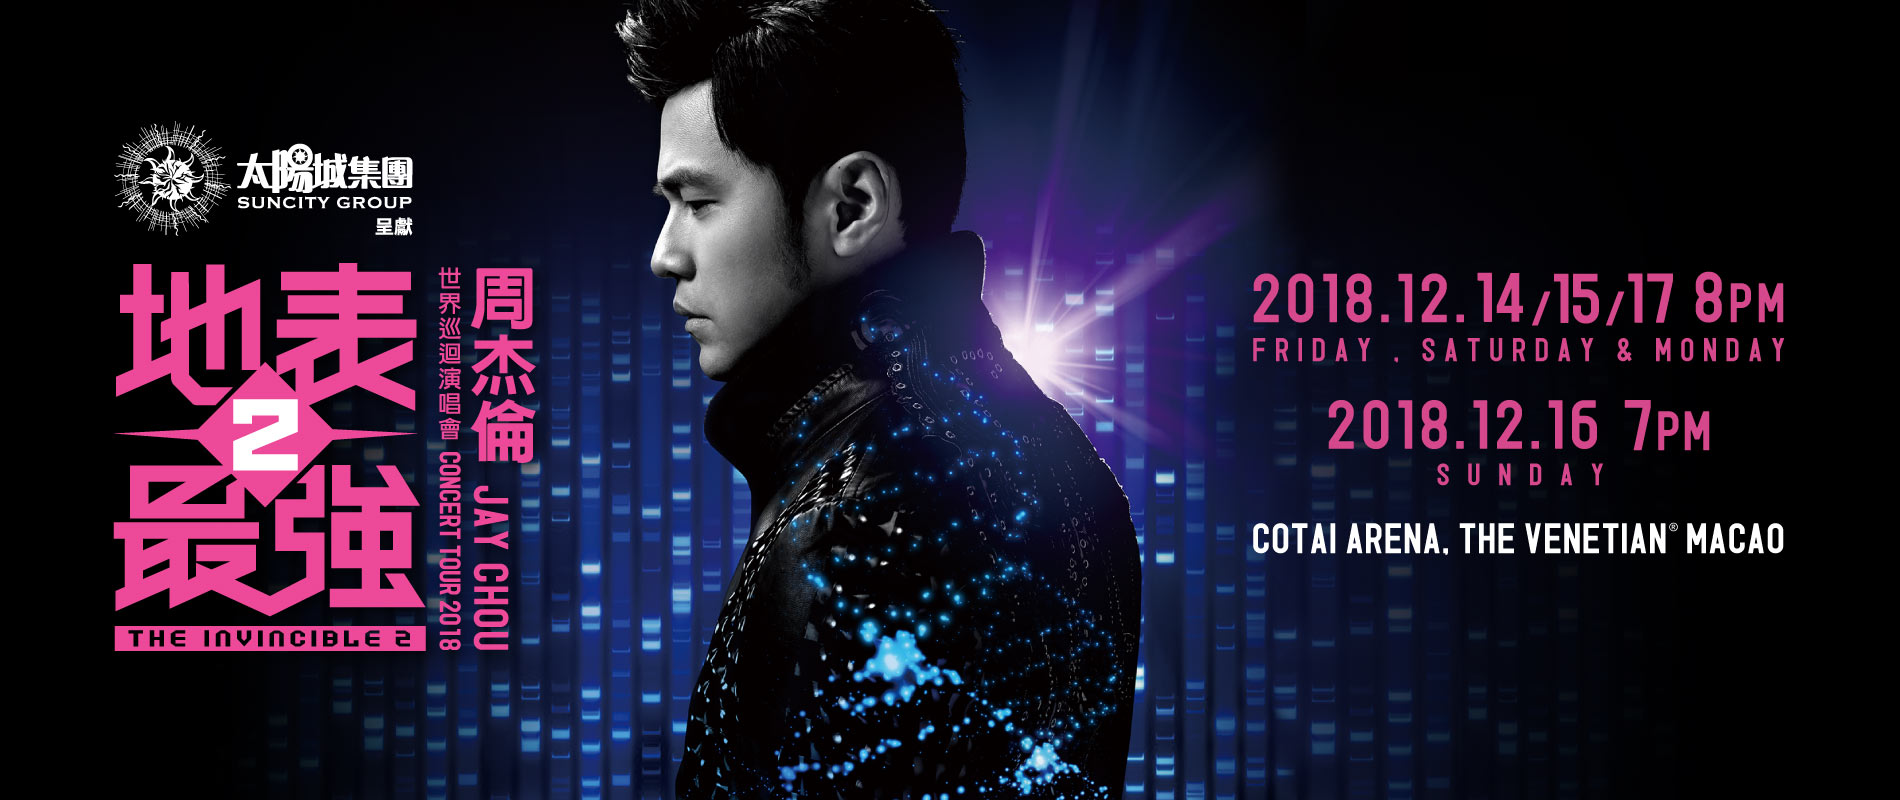 Jay Chou The Invincible Concert Tour 2 2018 - Macao ...